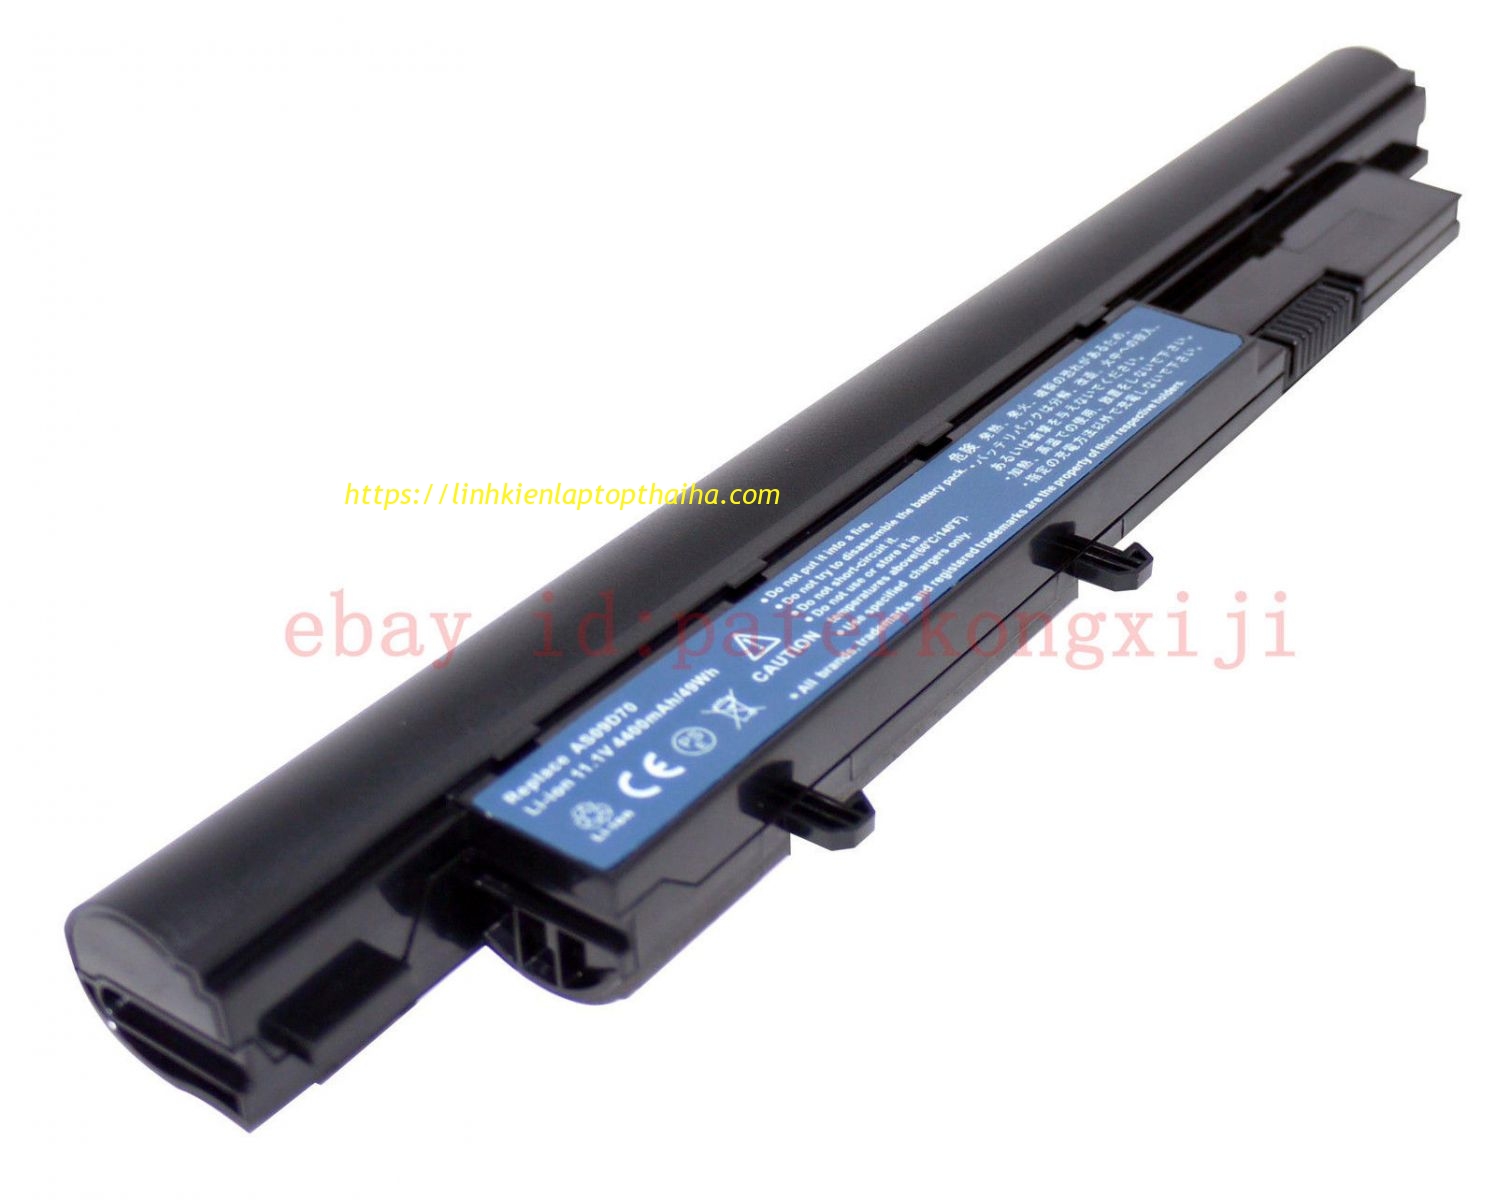 Dịch vụ sửa chữa Thay Pin Acer Aspire Timeline 3810T 4810 4810T AS09D36 AS09D56 AS09D70 AS09D71 giá tốt